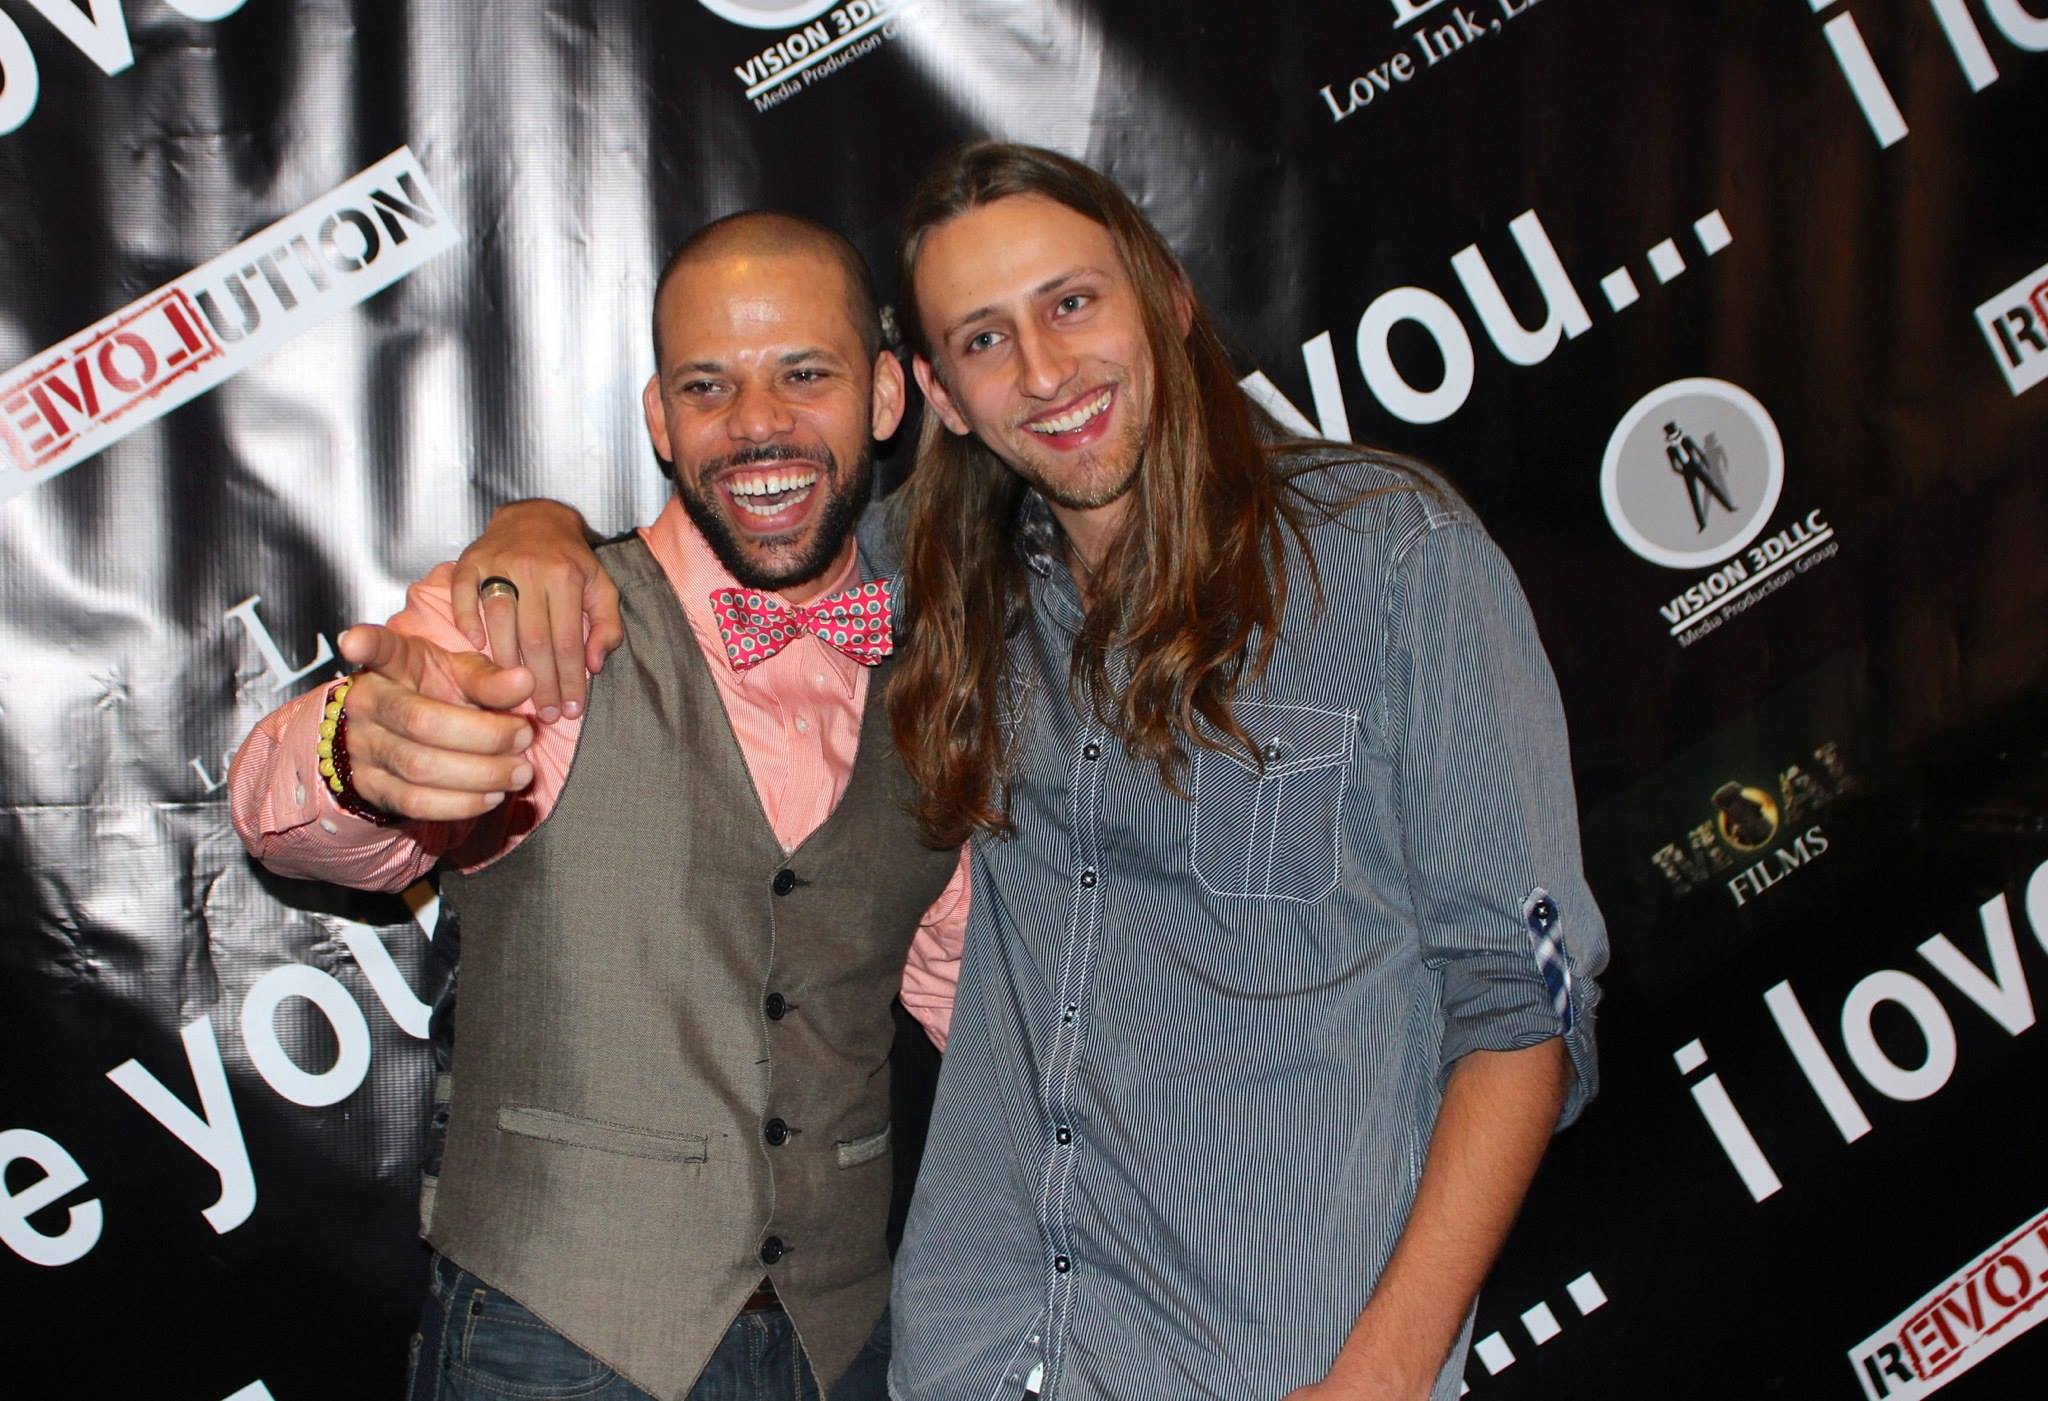 Director Lukas Colombo posing with Actor Brandon Byrd at the Feature Film Premiere of 